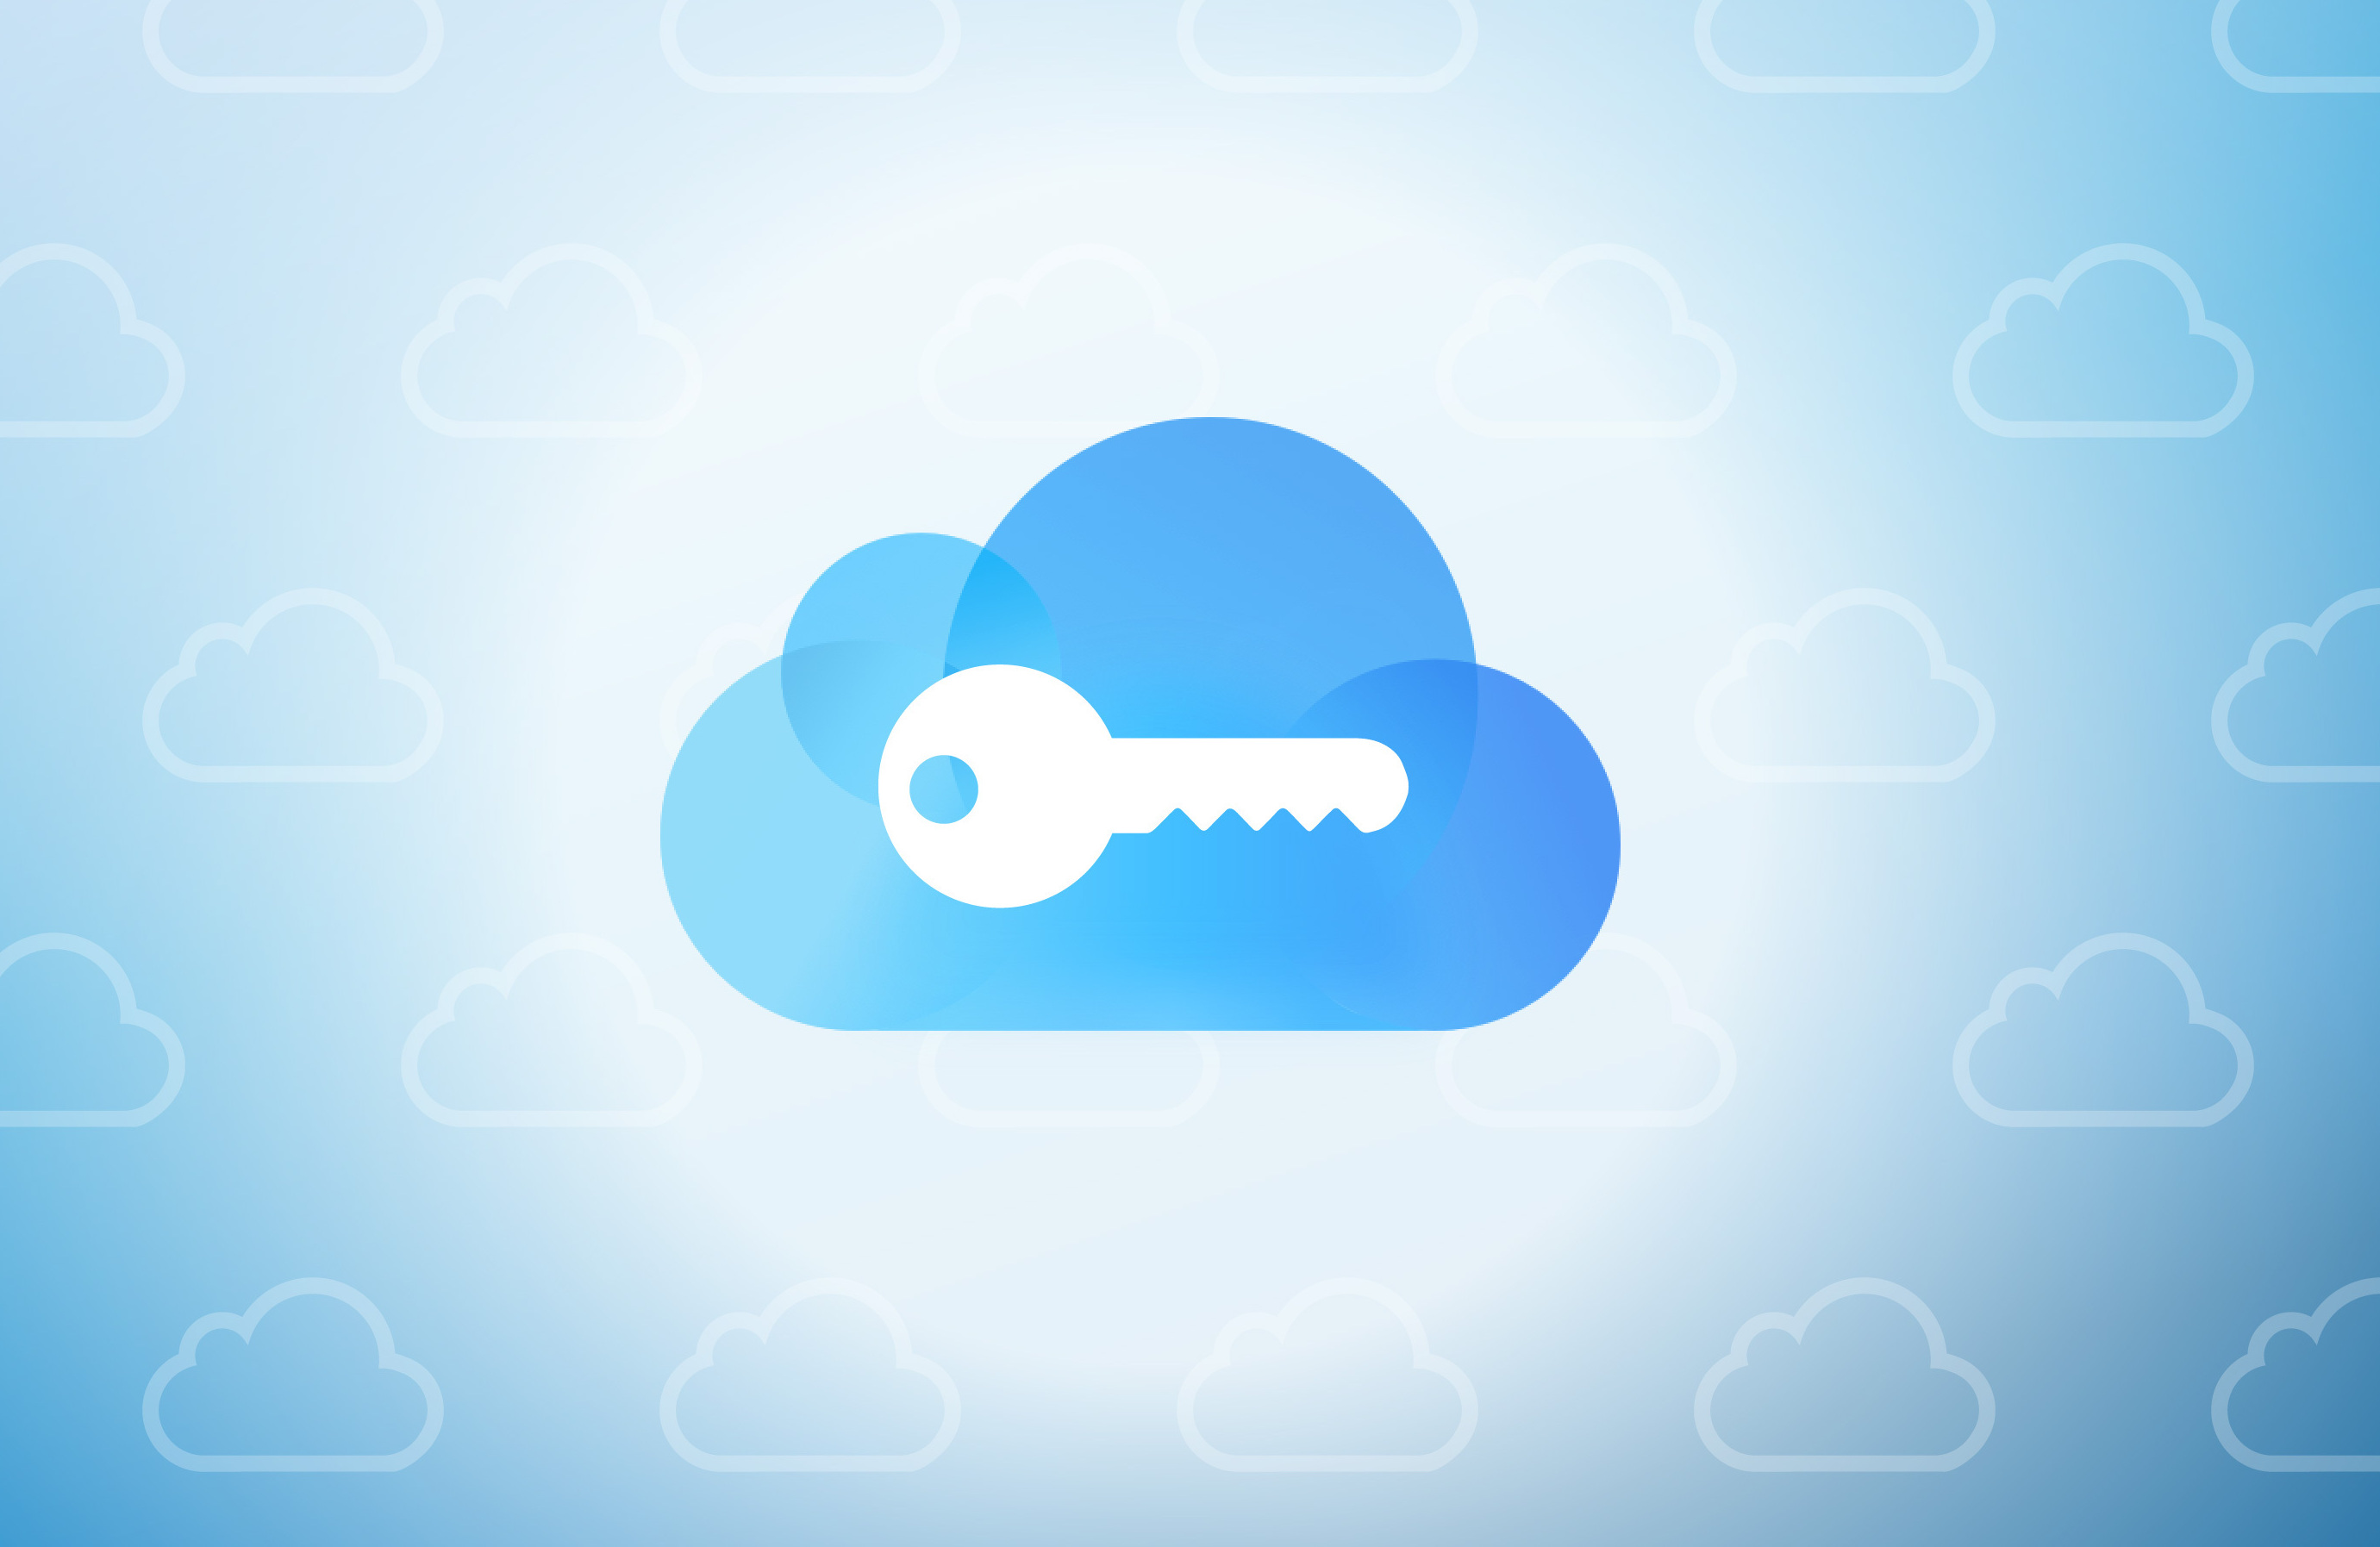 Illustration of key icon over cloud